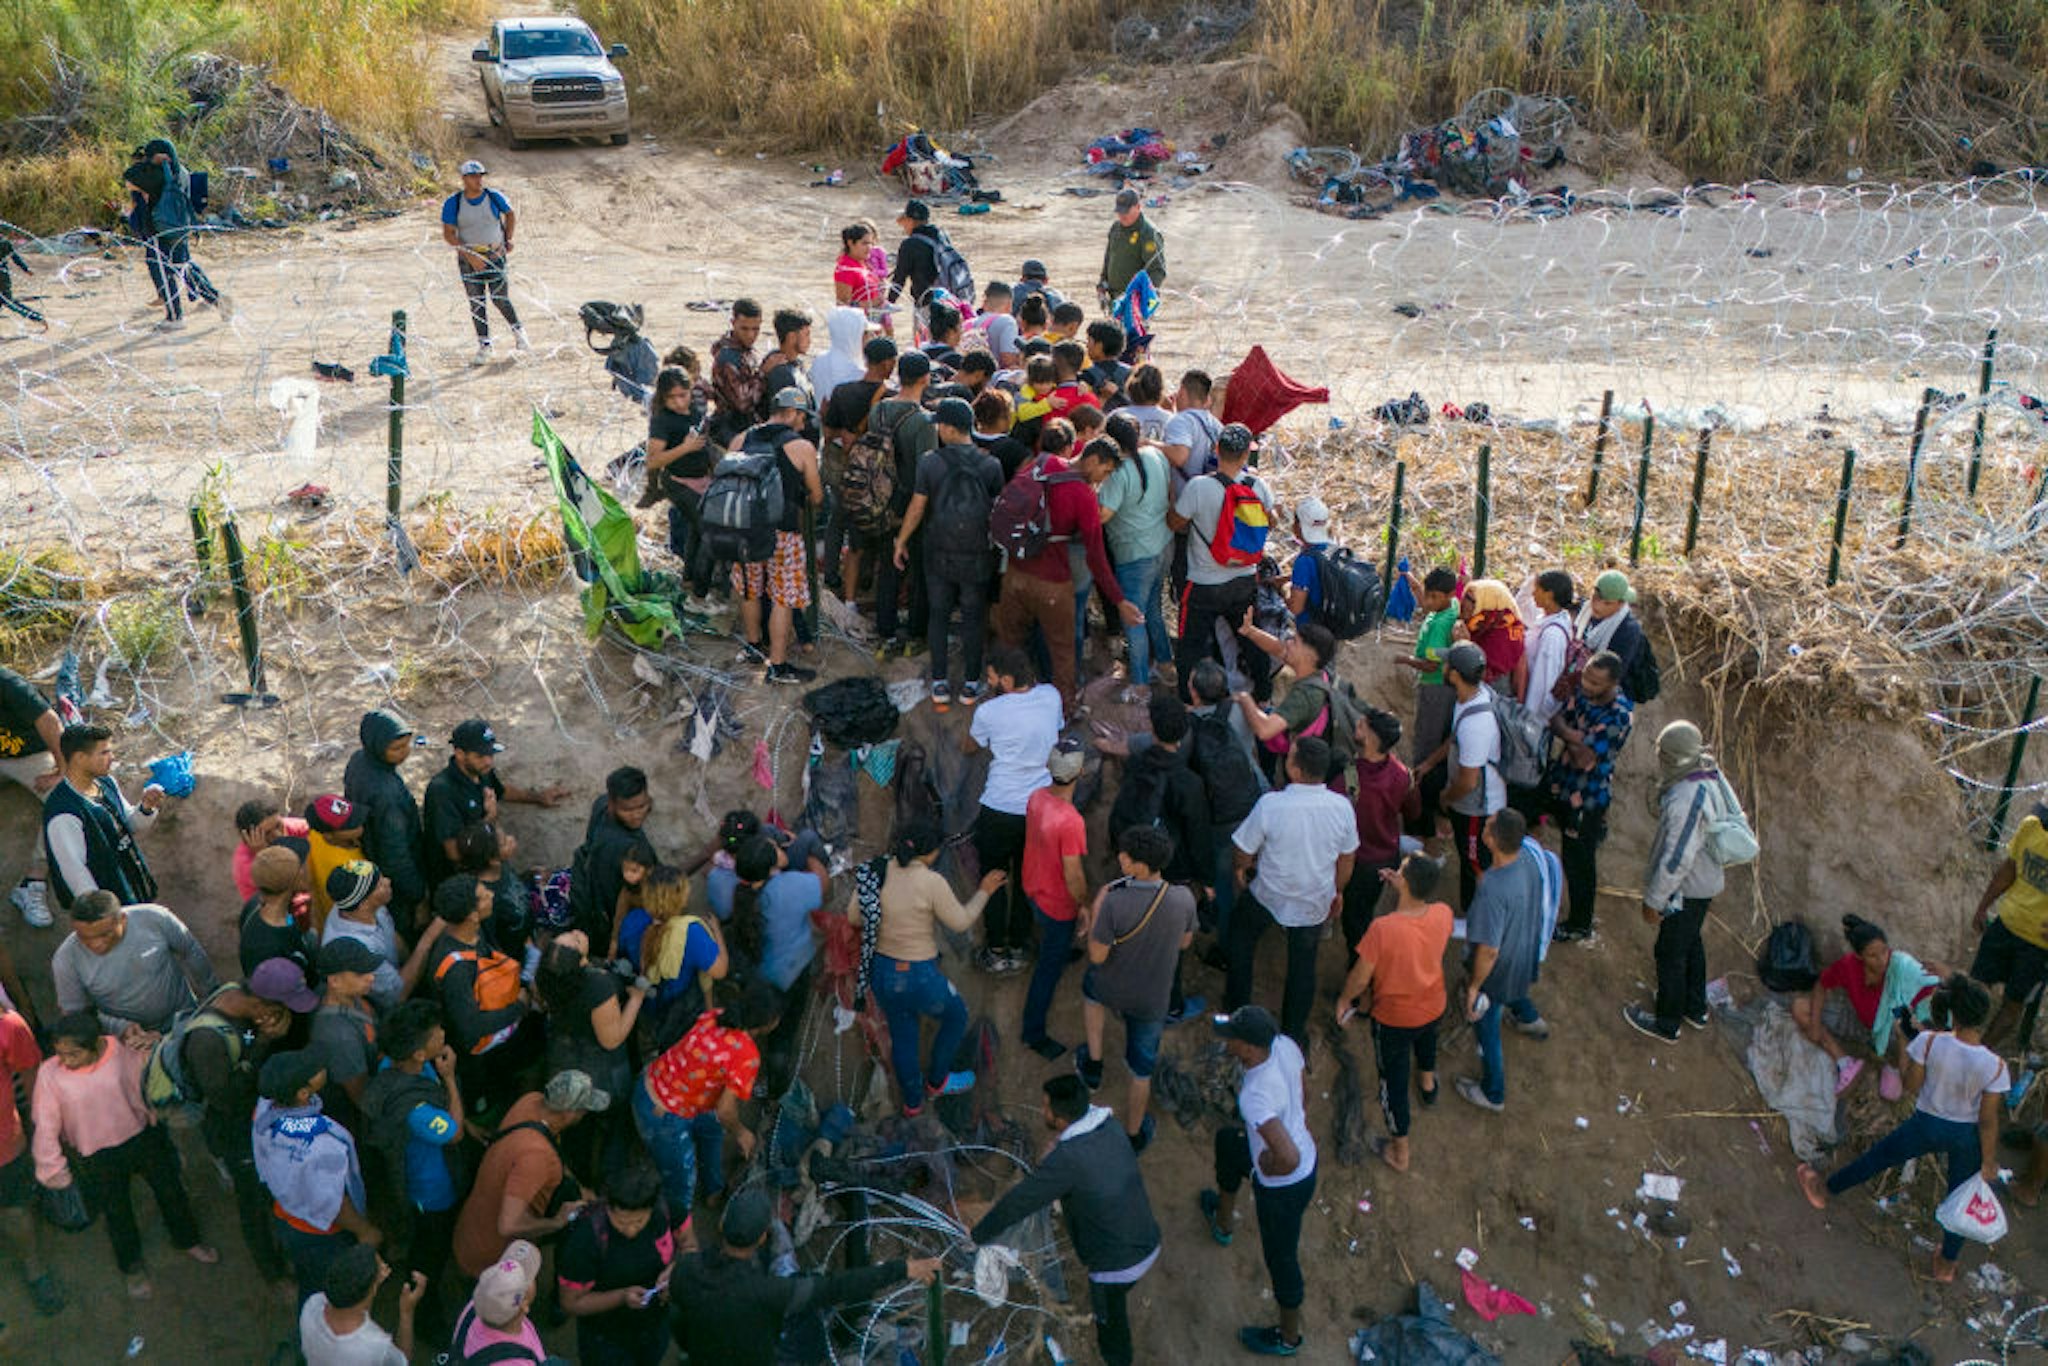 EAGLE PASS, TEXAS - SEPTEMBER 30: As seen from an aerial view, a U.S. Border Patrol agent supervises as immigrants walk into the United States after crossing the Rio Grande from Mexico on September 30, 2023 in Eagle Pass, Texas. The agent had cut coils of razor wire to let them pass through for processing. Immigration and border security have become major issues in ongoing negotiations to fund the U.S. government. A recent surge in immigrant crossings has overwhelmed border authorities.